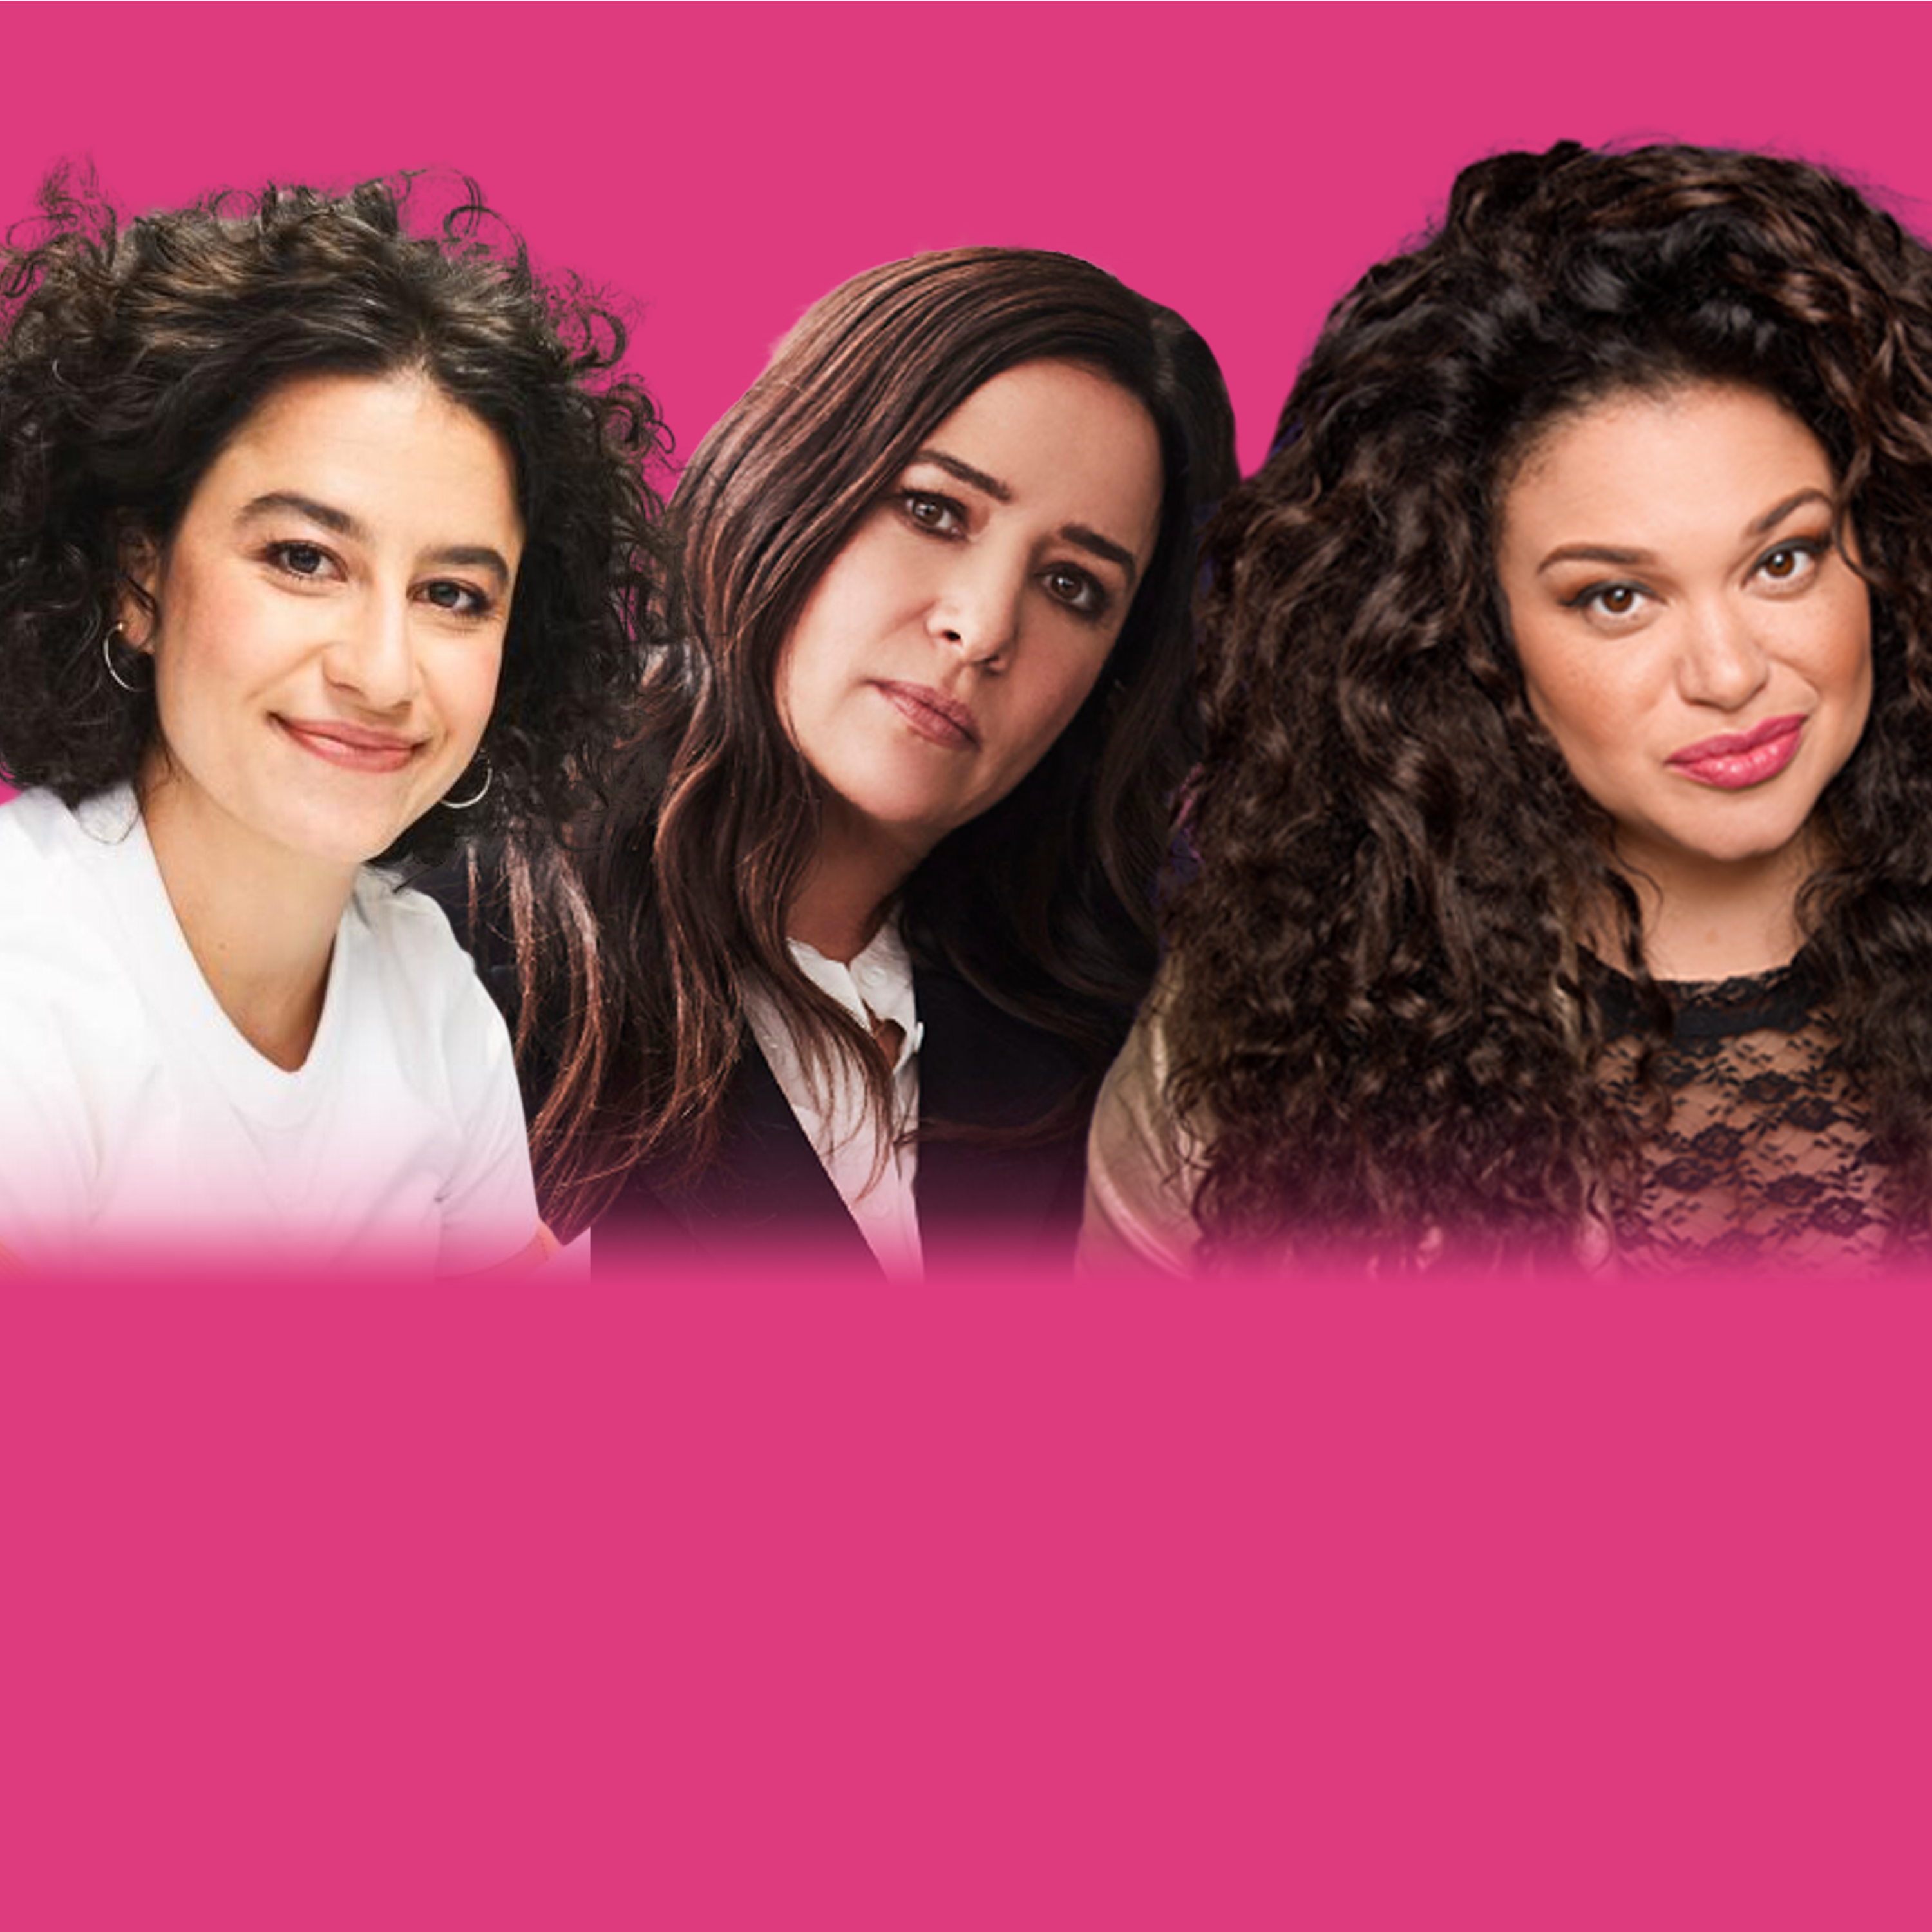 Babes or Babies? (Live from SXSW with Ilana Glazer, Pamela Adlon, and Michelle Buteau)